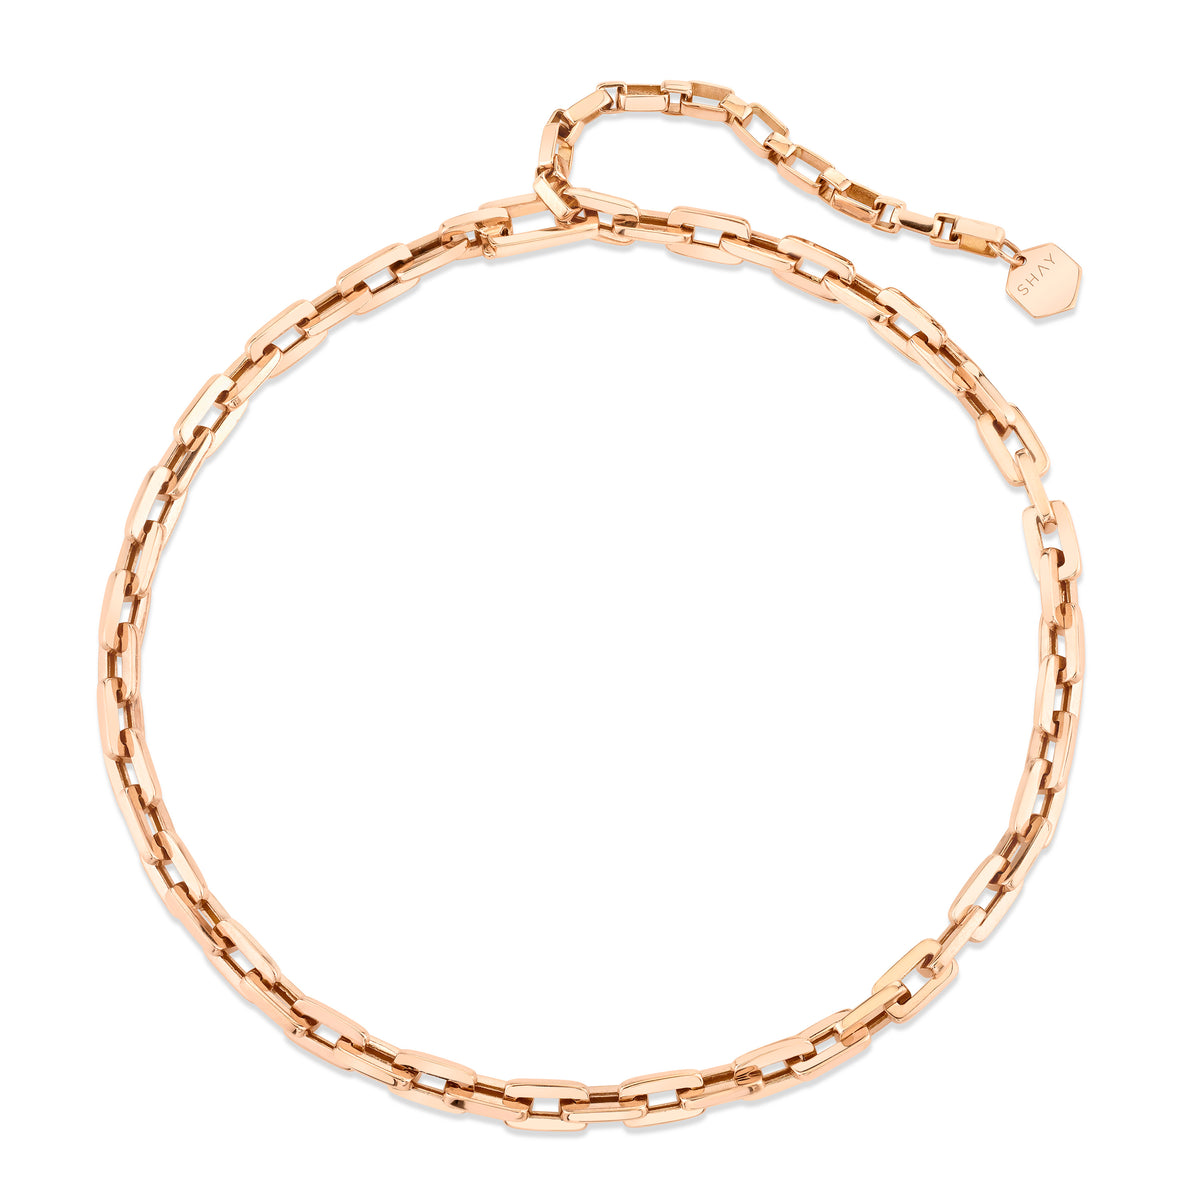 SOLID GOLD MINI DECO LINK NECKLACE